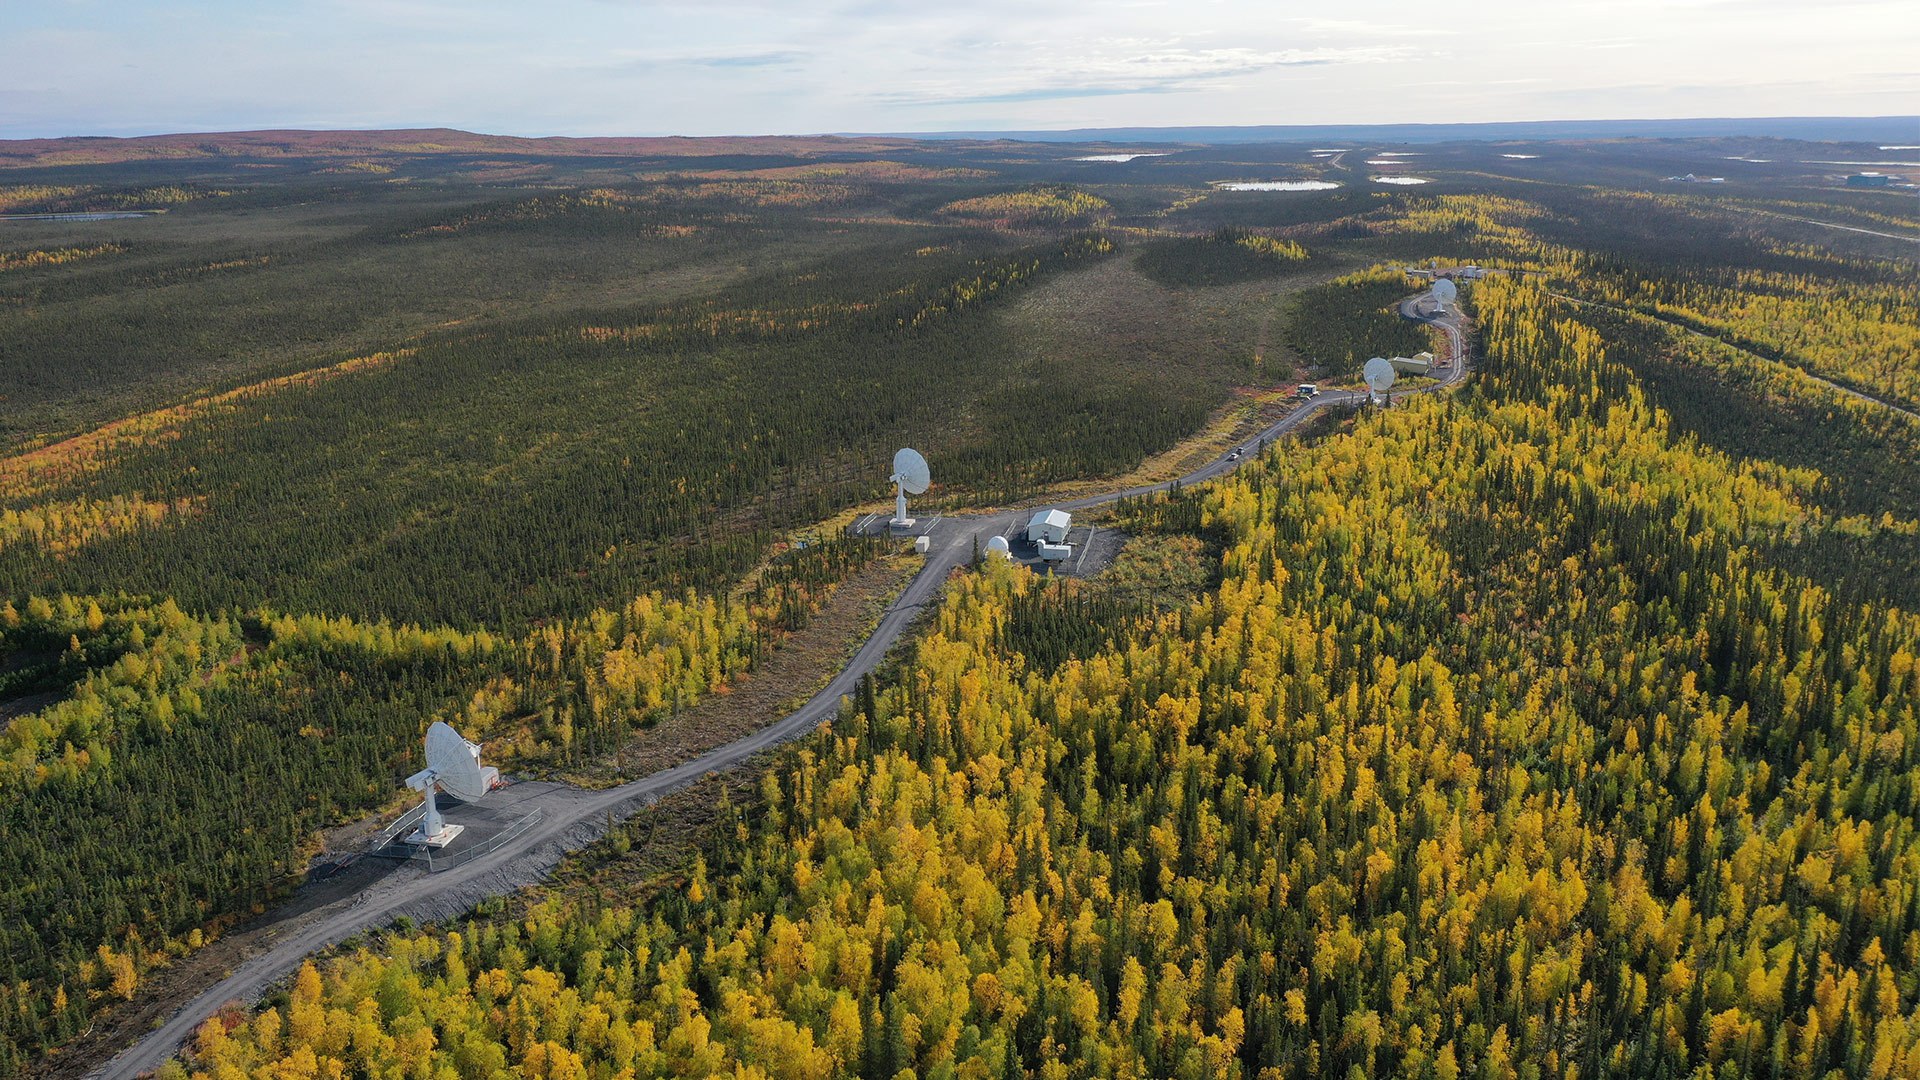 The Inuvik Satellite Station Facility (ISSF)